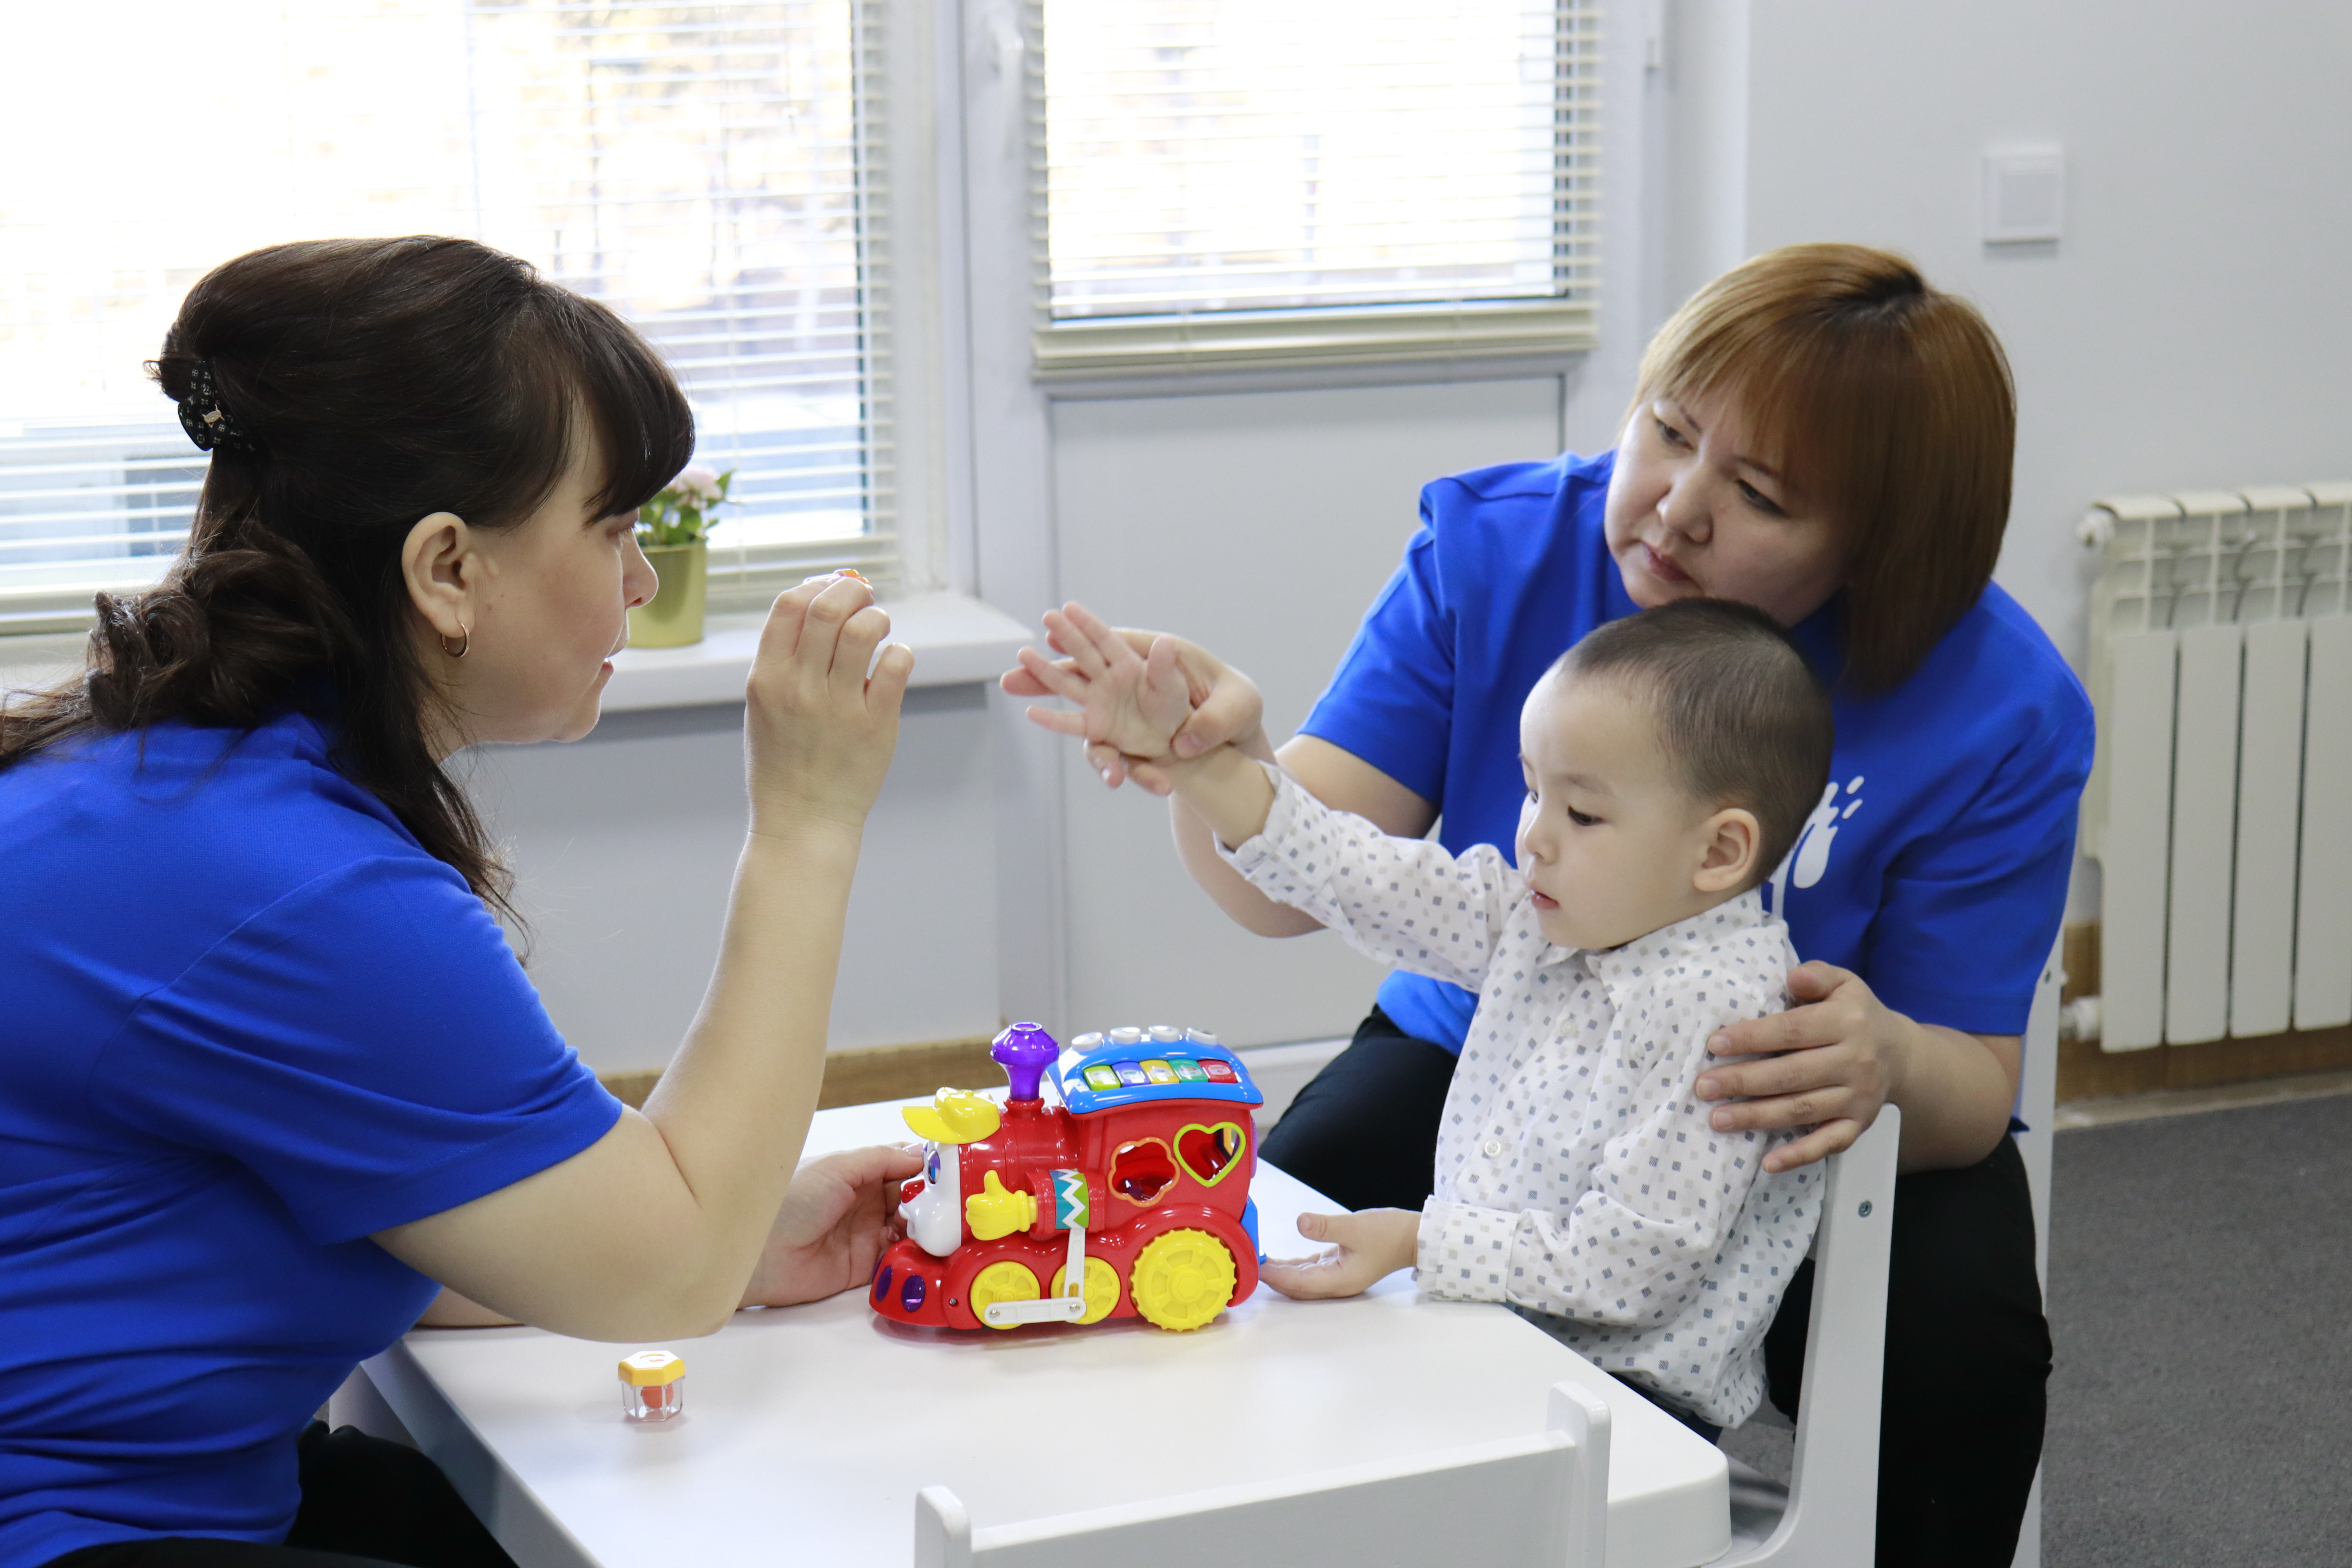 Kazakhstan observes the 2nd of April as the World Autism Awareness Day